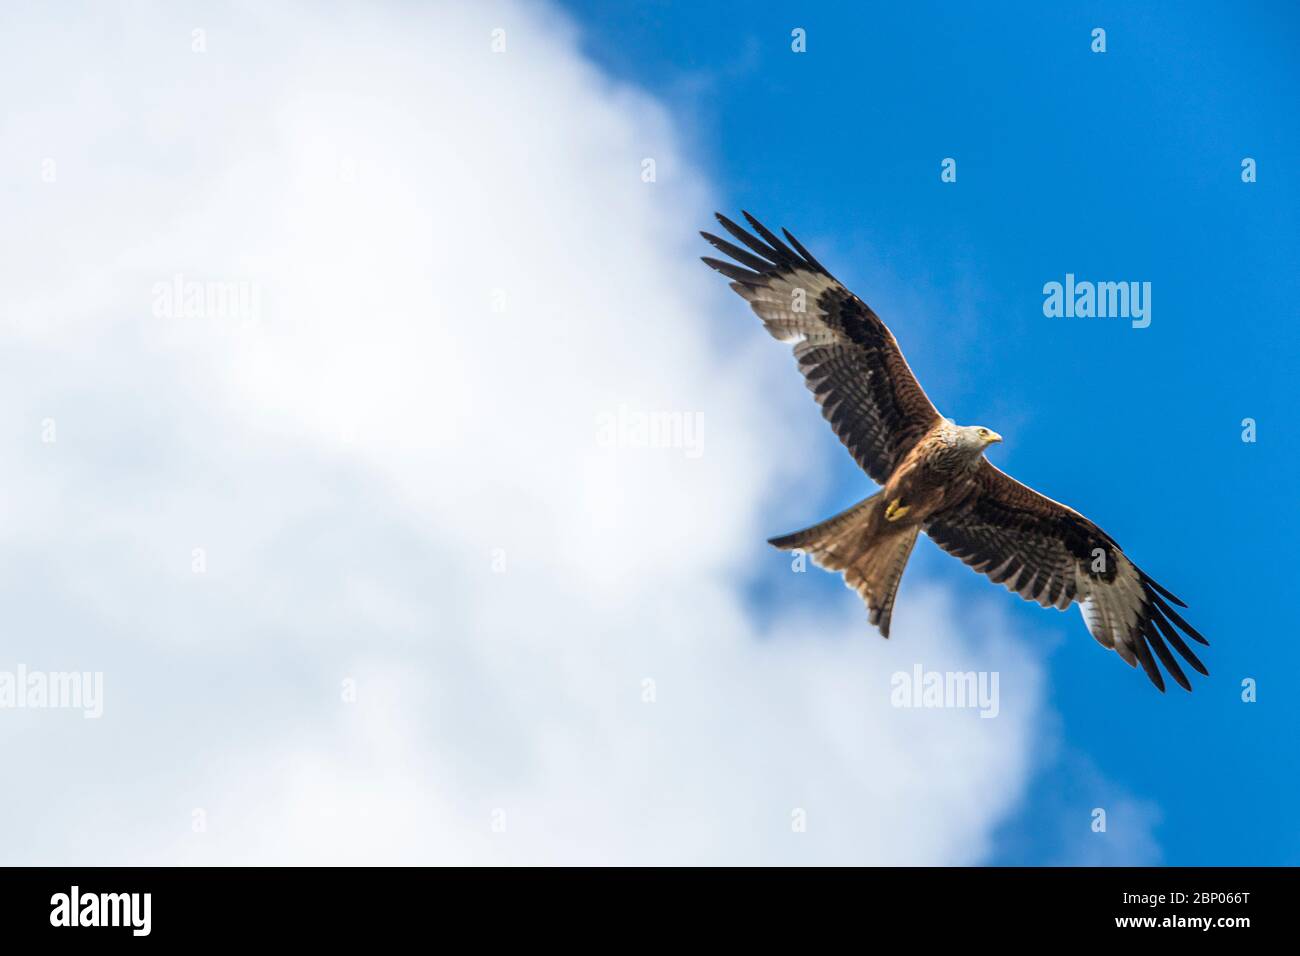 16 May, 2020 Pictured: A kite seen from below flies toward blue skies from clouds. Credit: Rich Dyson/Alamy Stock Photo